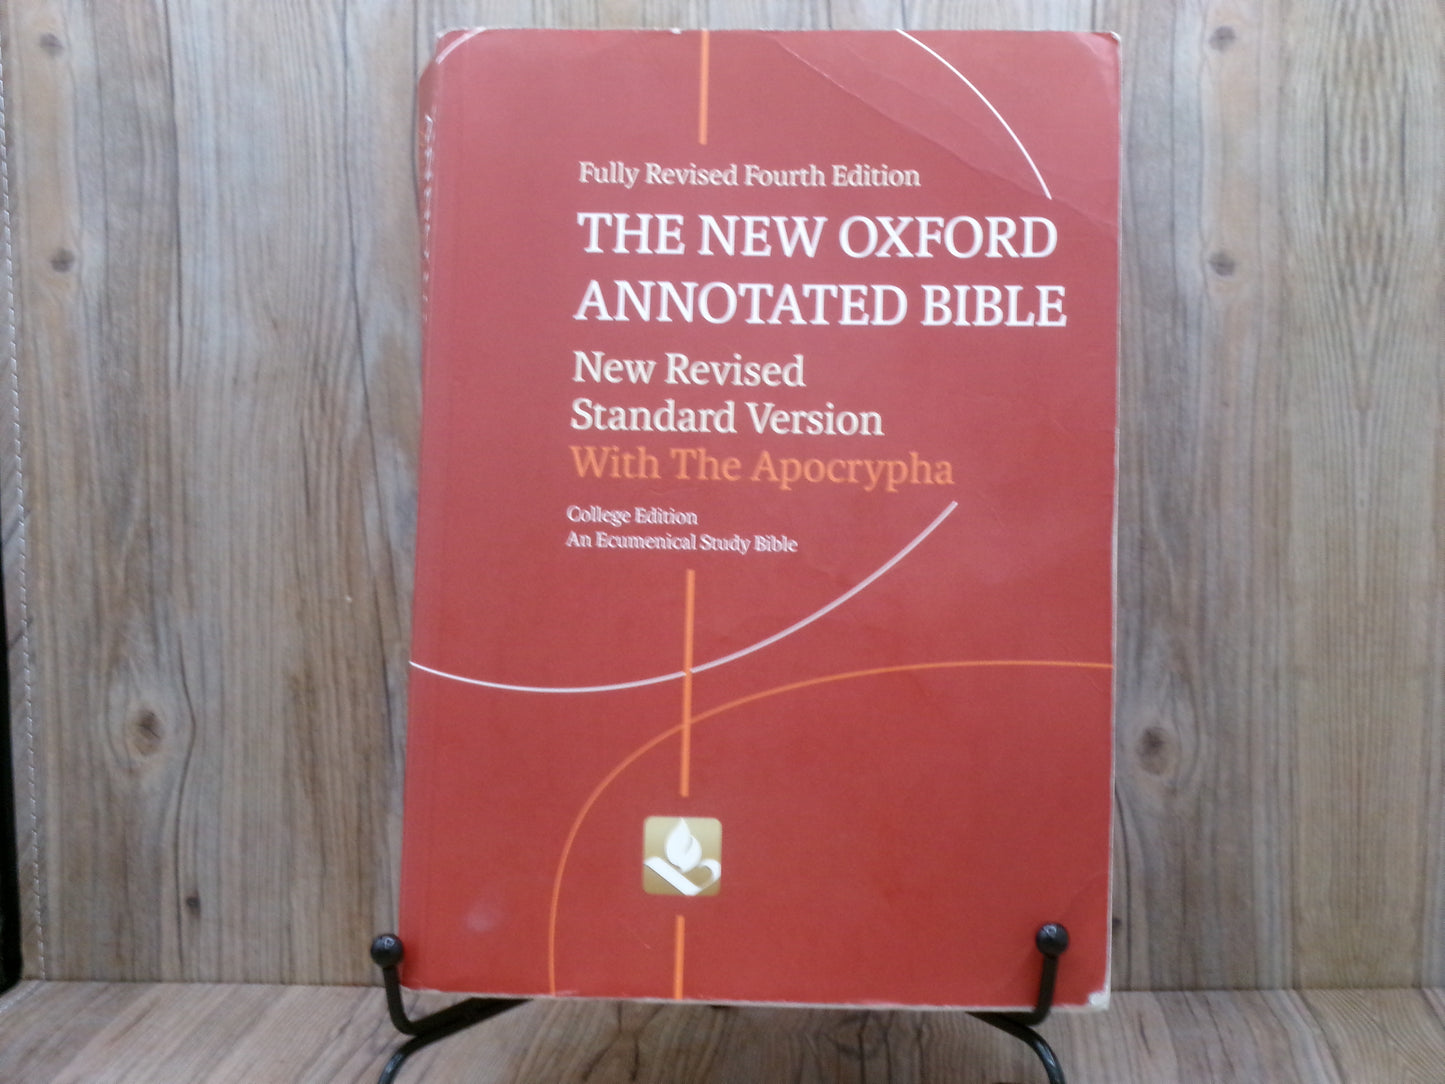 The New Oxford Annotated Bible New Revised Standard Version With The Apocrypha